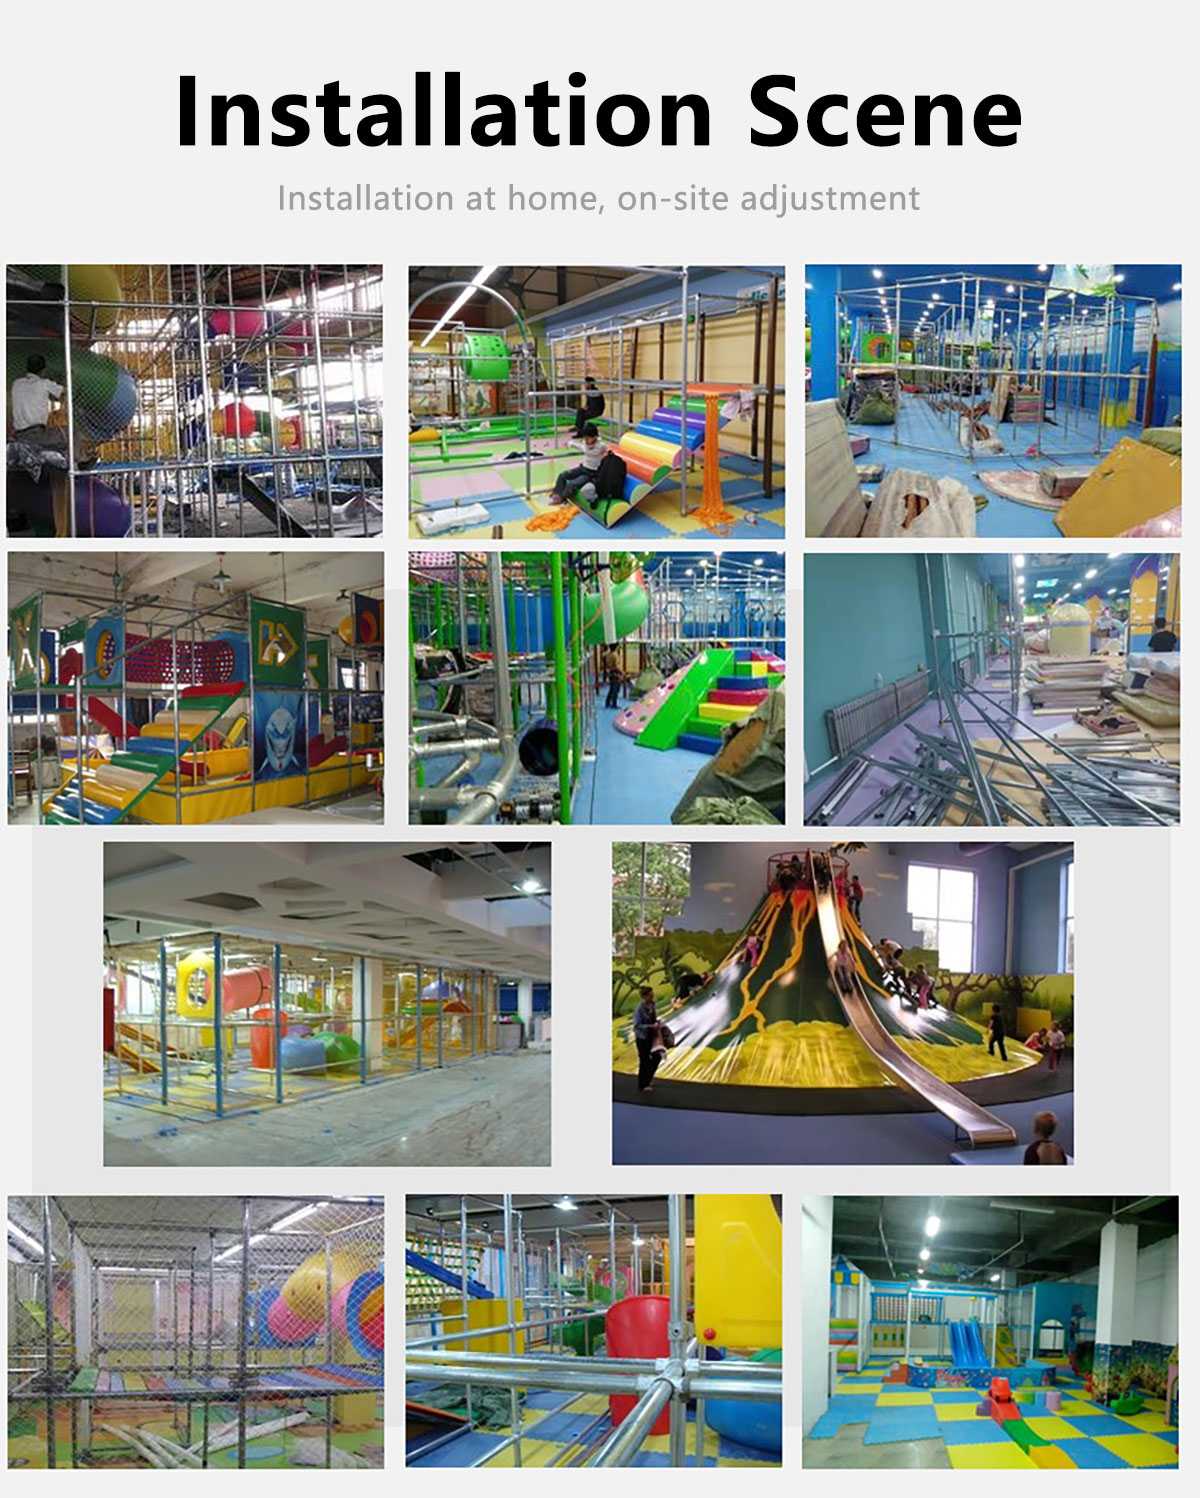 space themes for indoor playground design service (5)